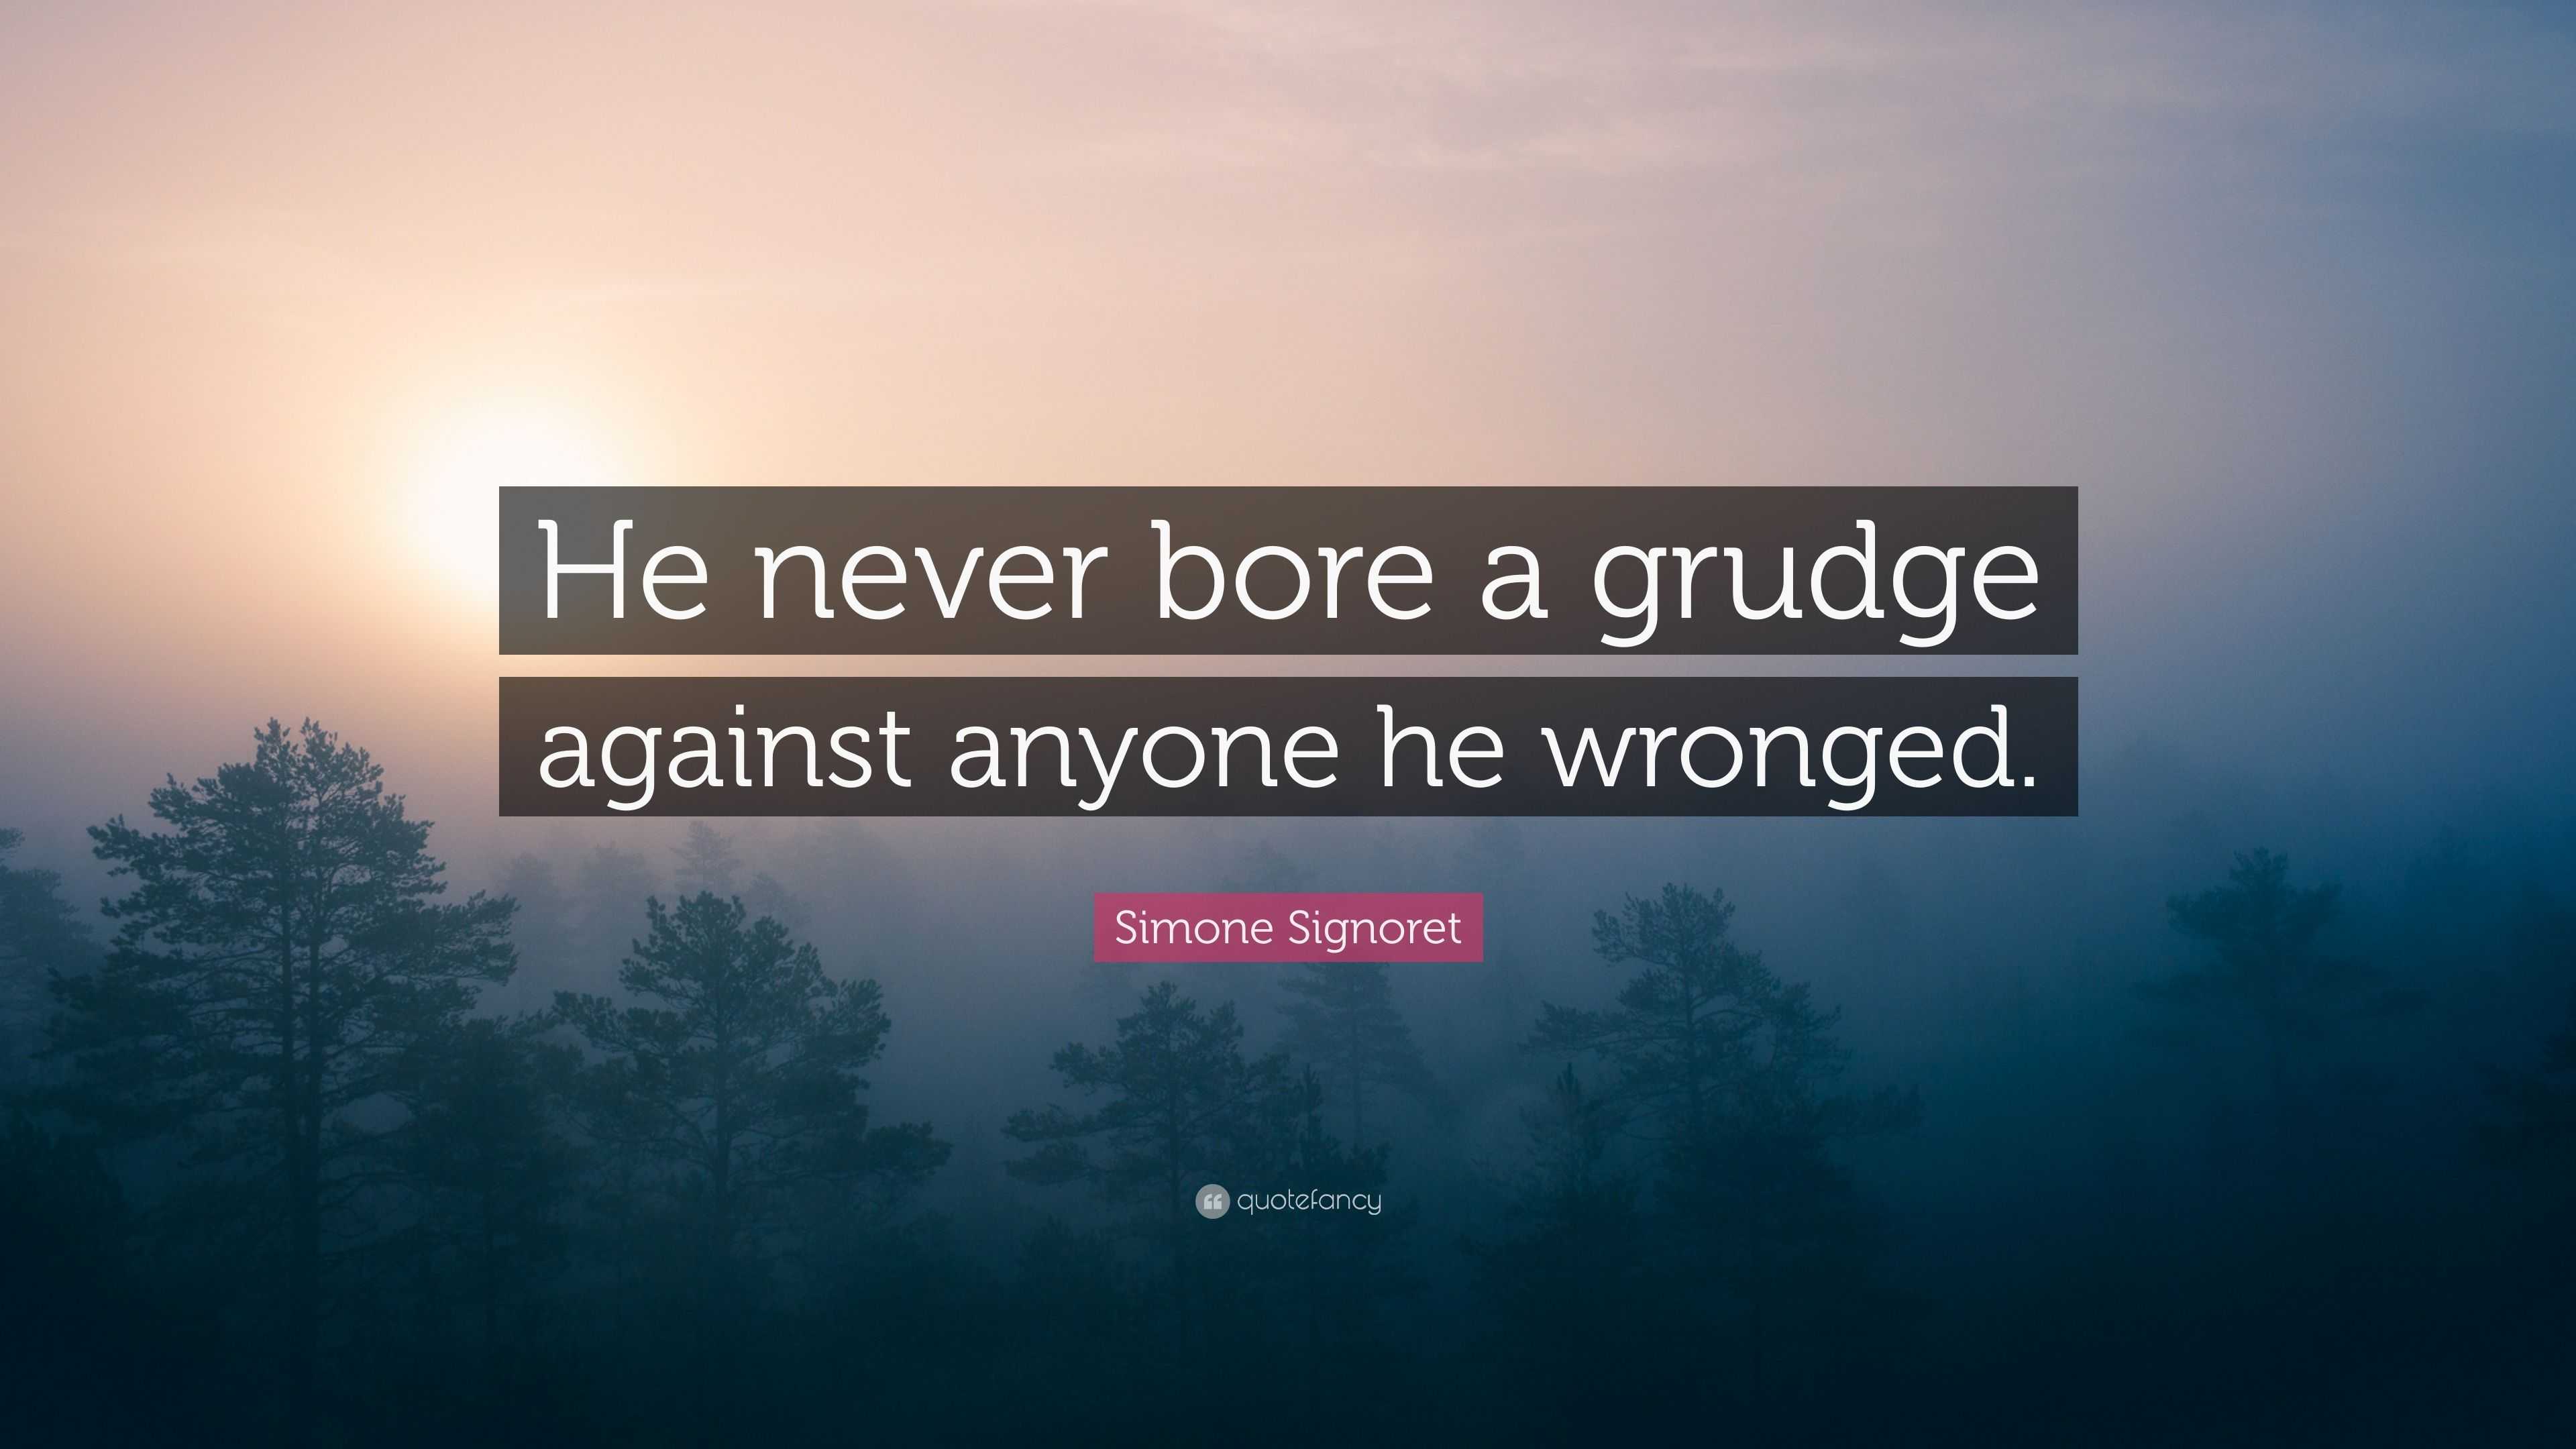 Simone Signoret Quote: “He never bore a grudge against anyone he wronged.”